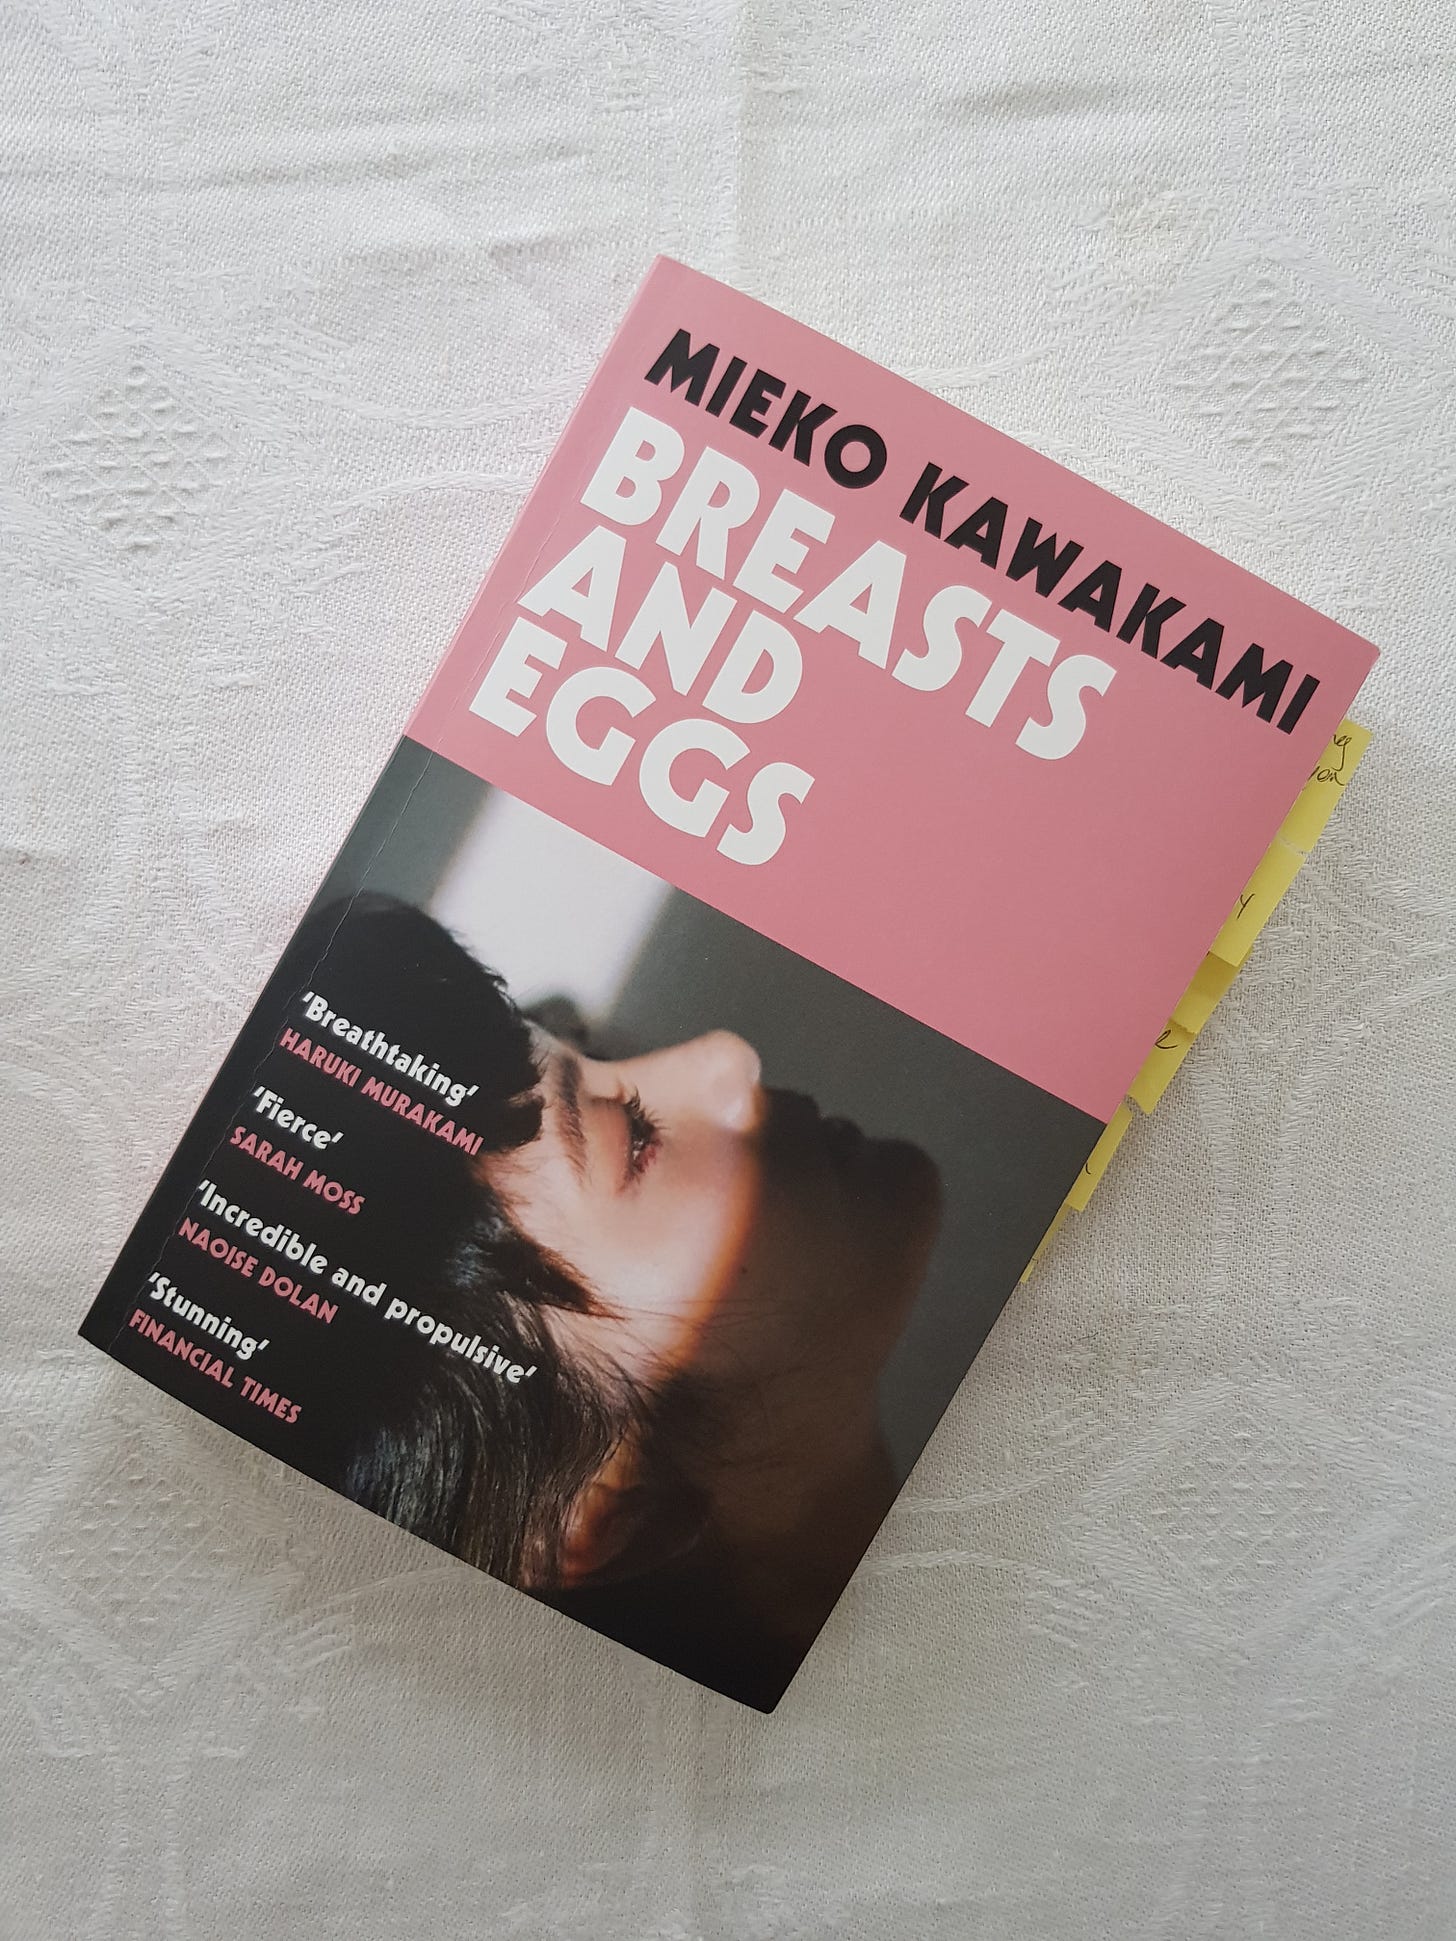 The cover of Mieko Kawakami's book, Breasts and Eggs.